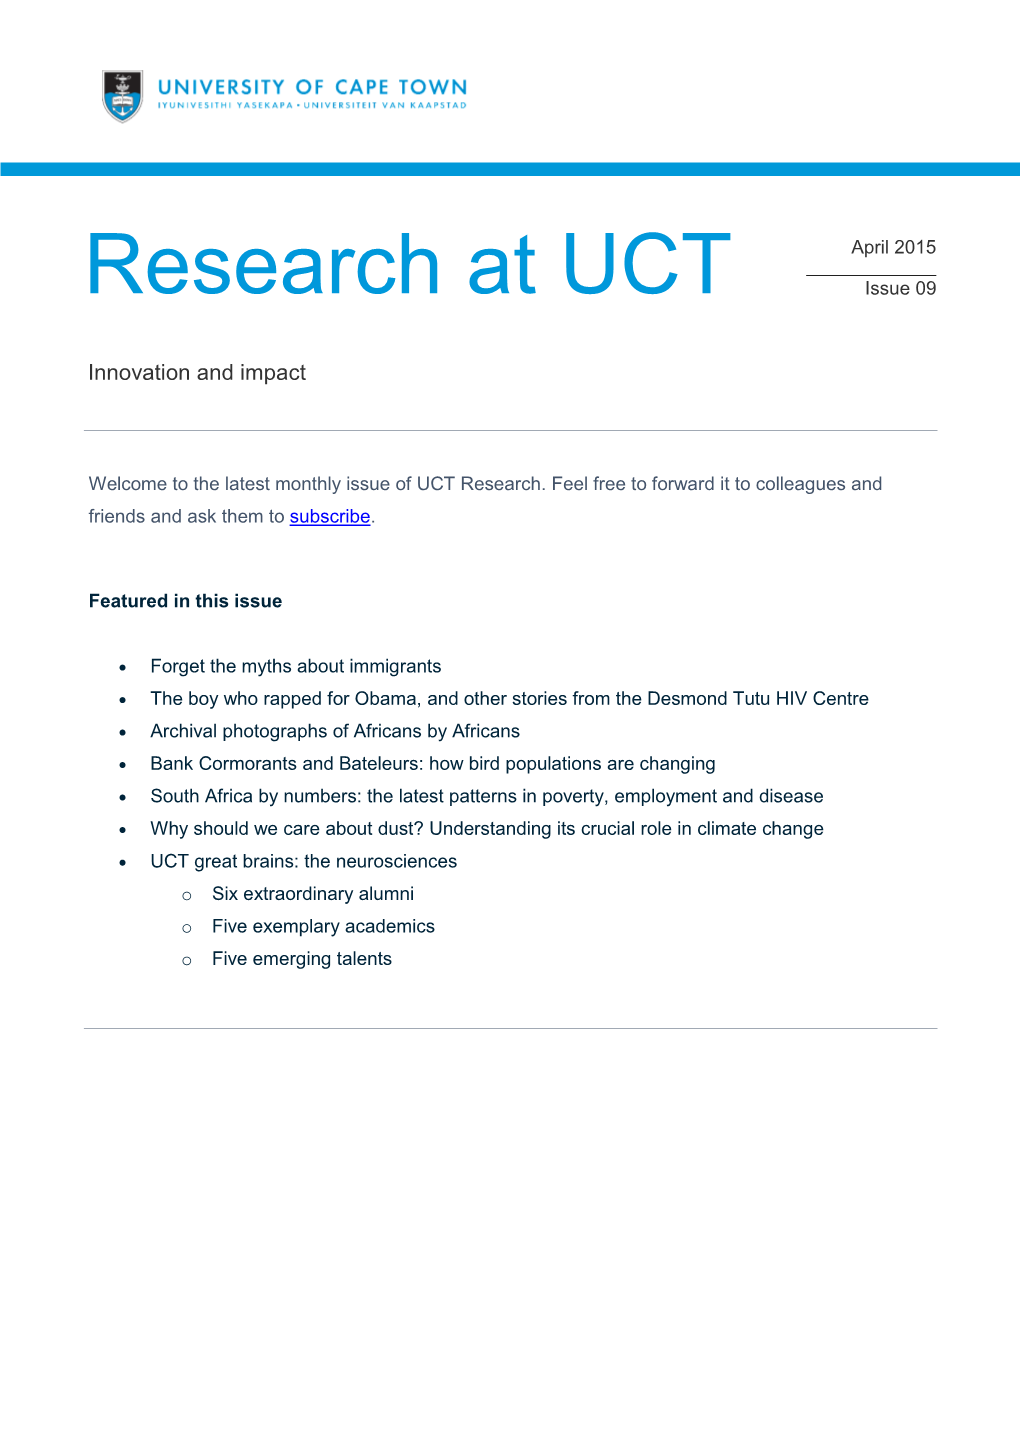 Research at UCT Issue 09